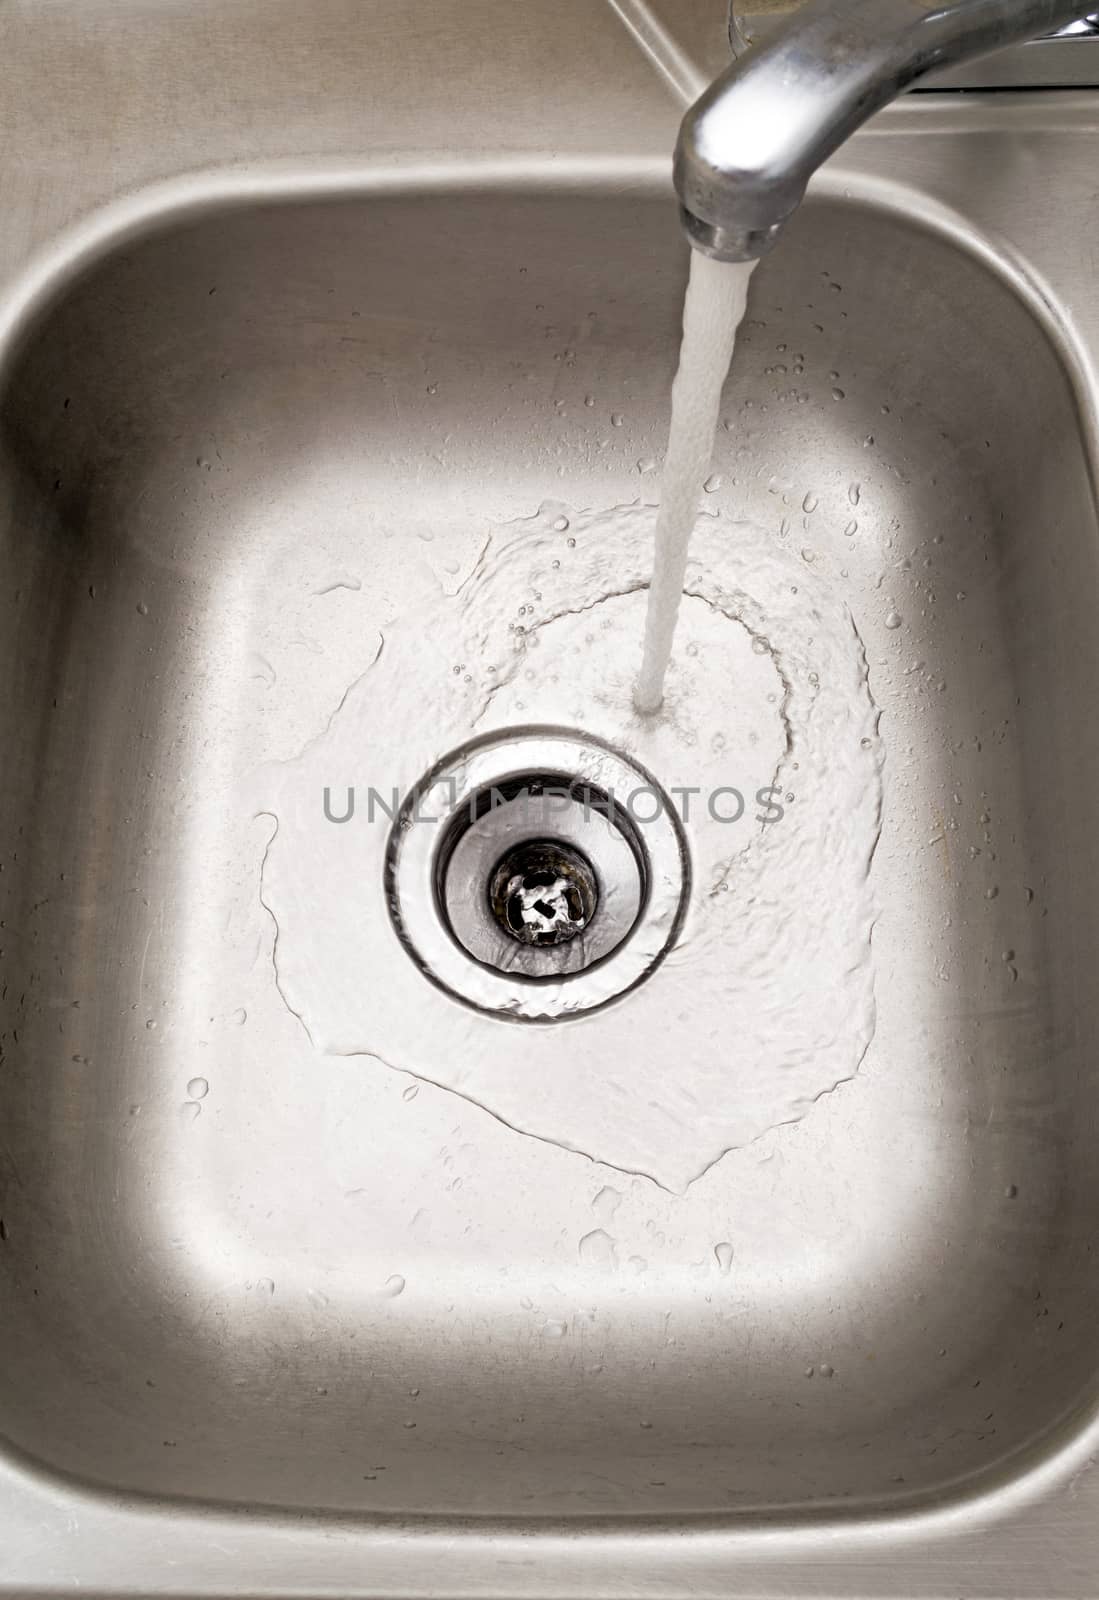 Close Up Shot Of Stainless Steel Sink With Water Running Down Drain by stockbuster1